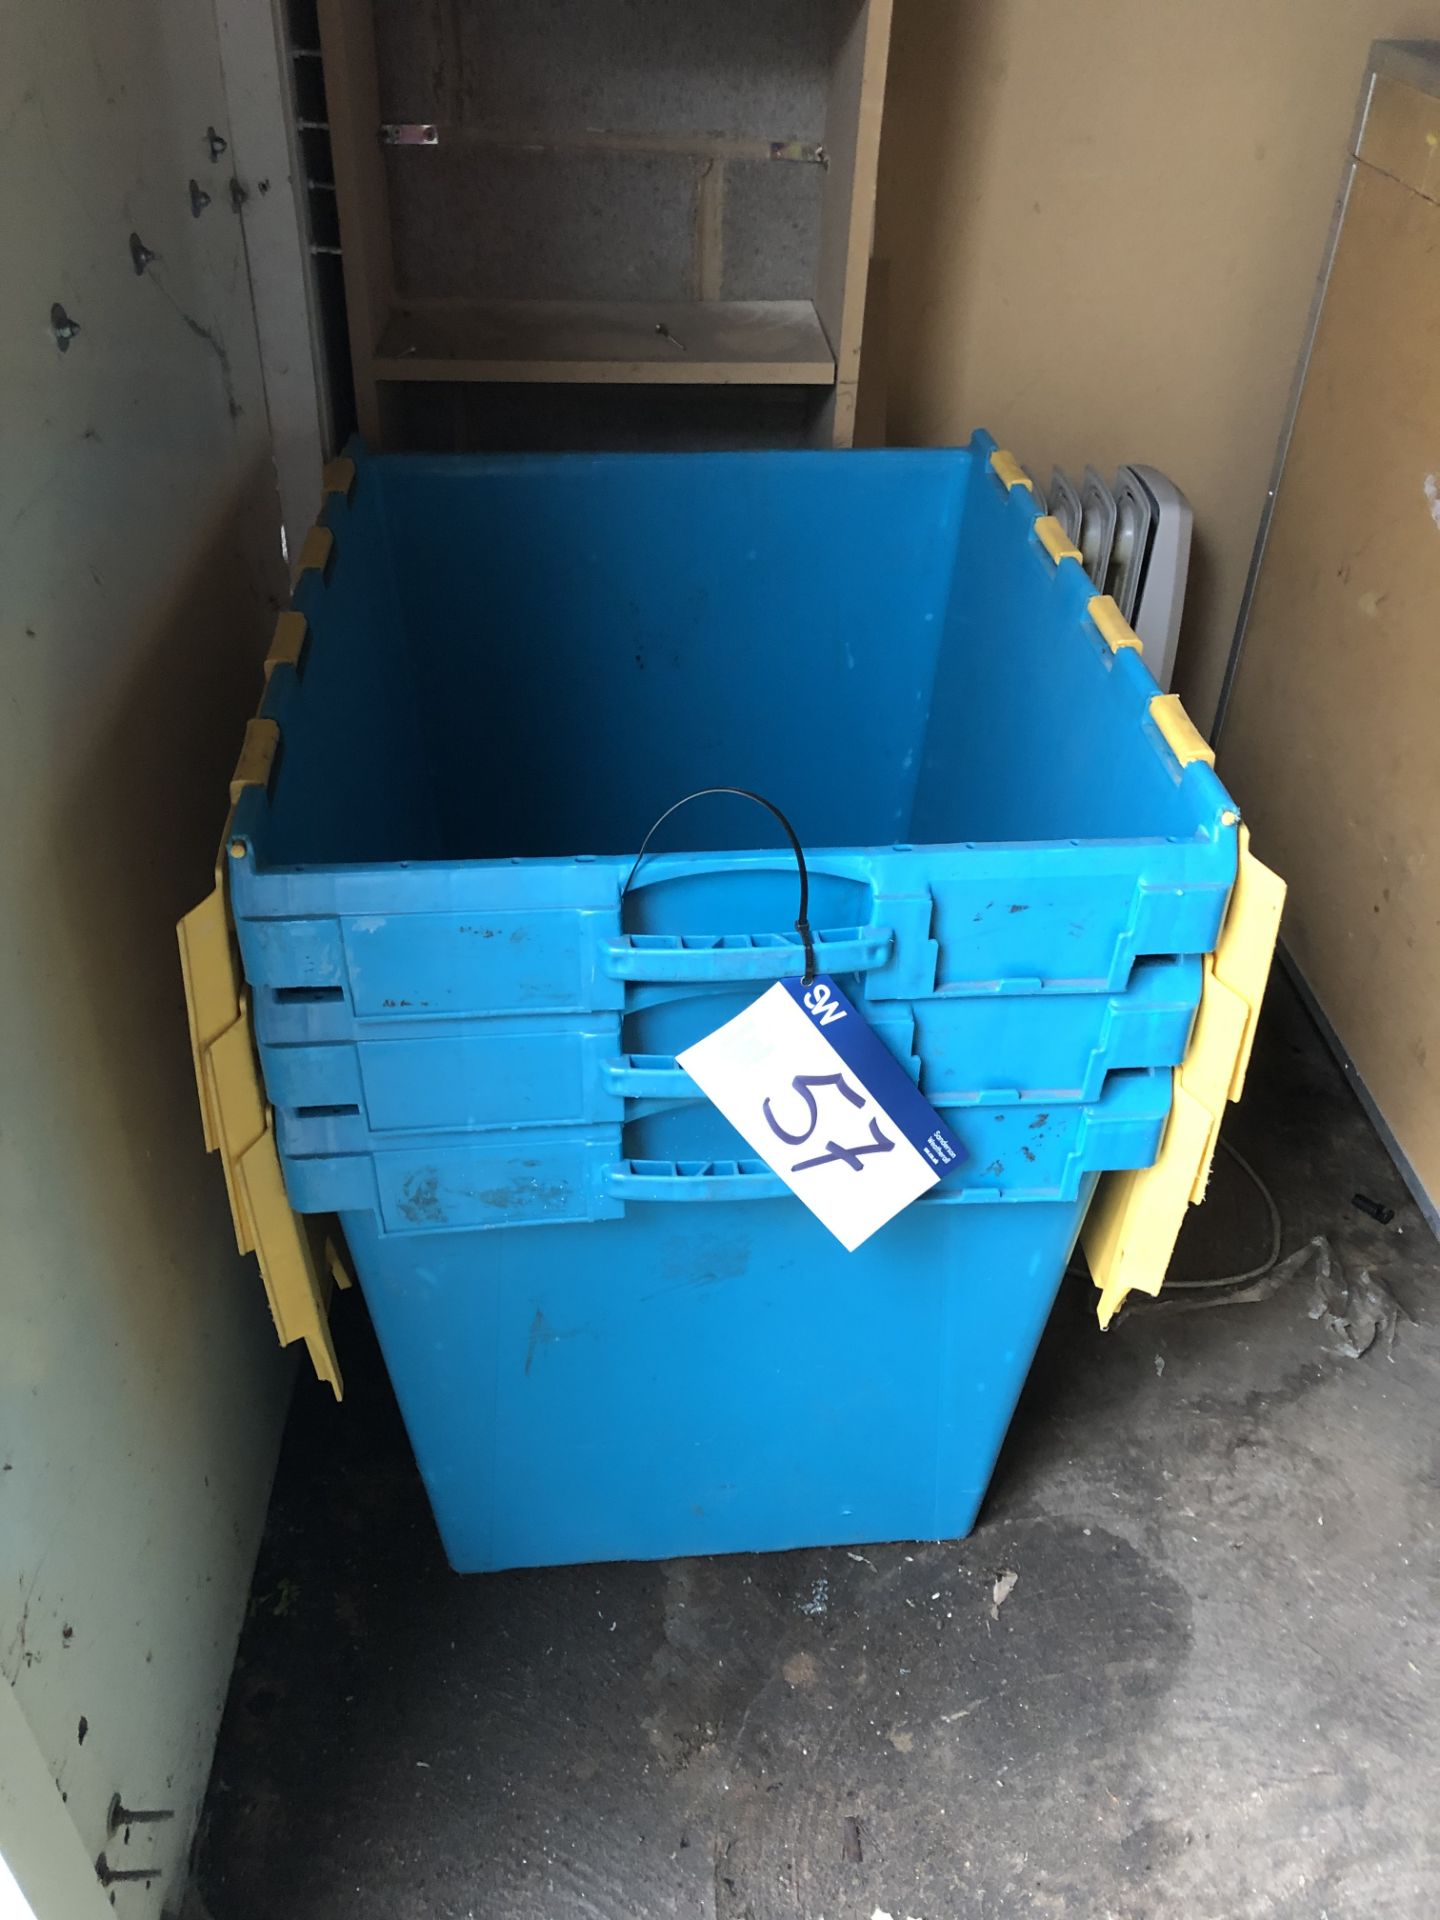 5 Plastic Crates and Contents